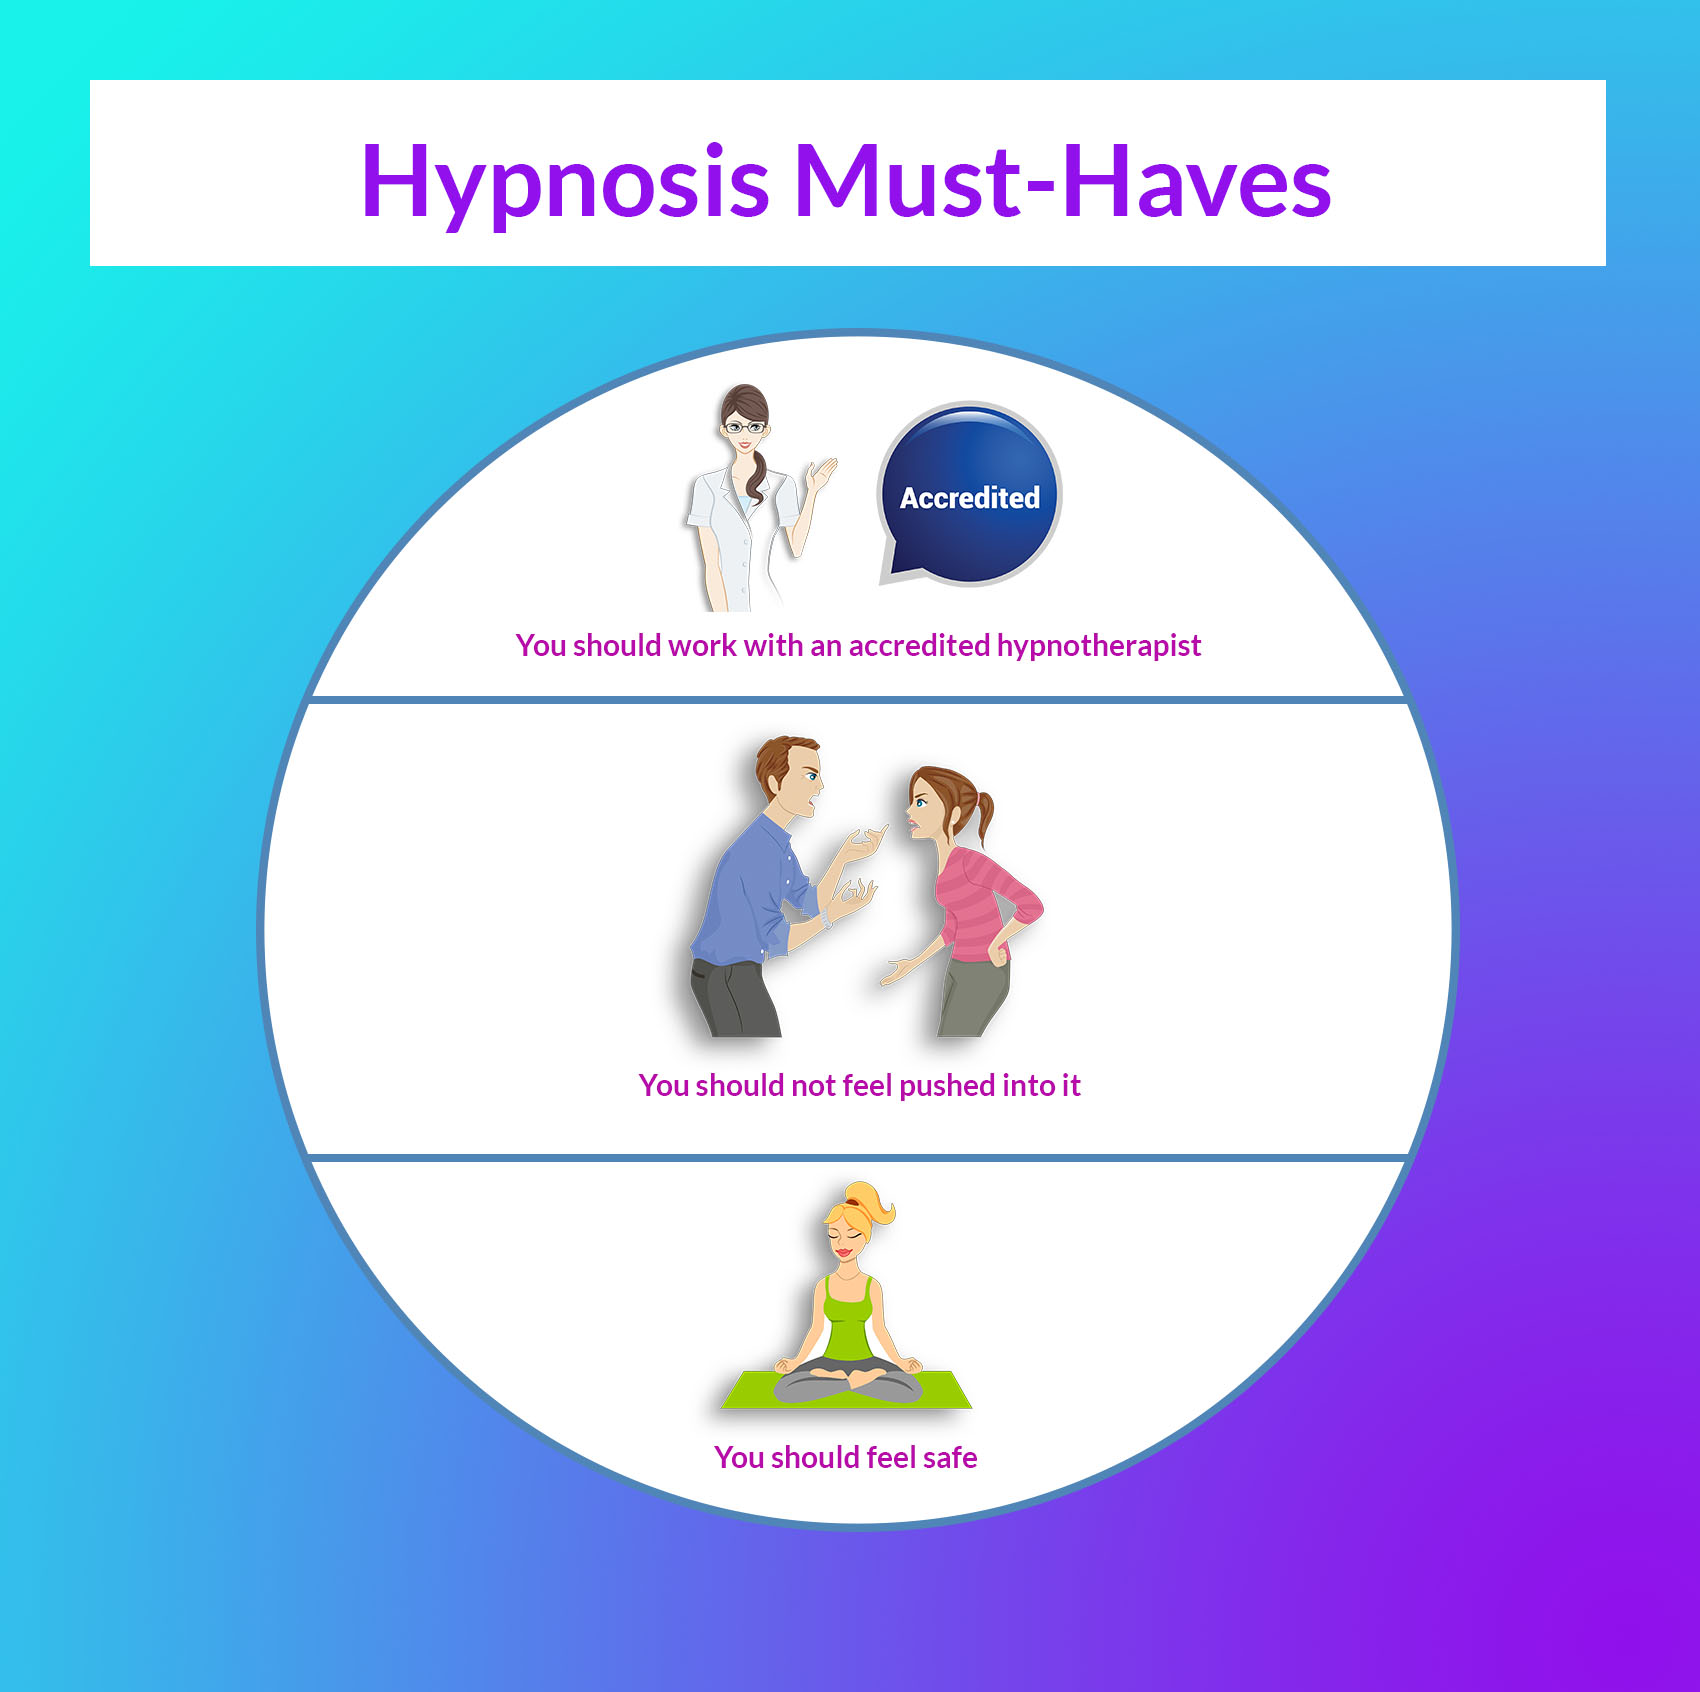 Hypnotherapy must-haves